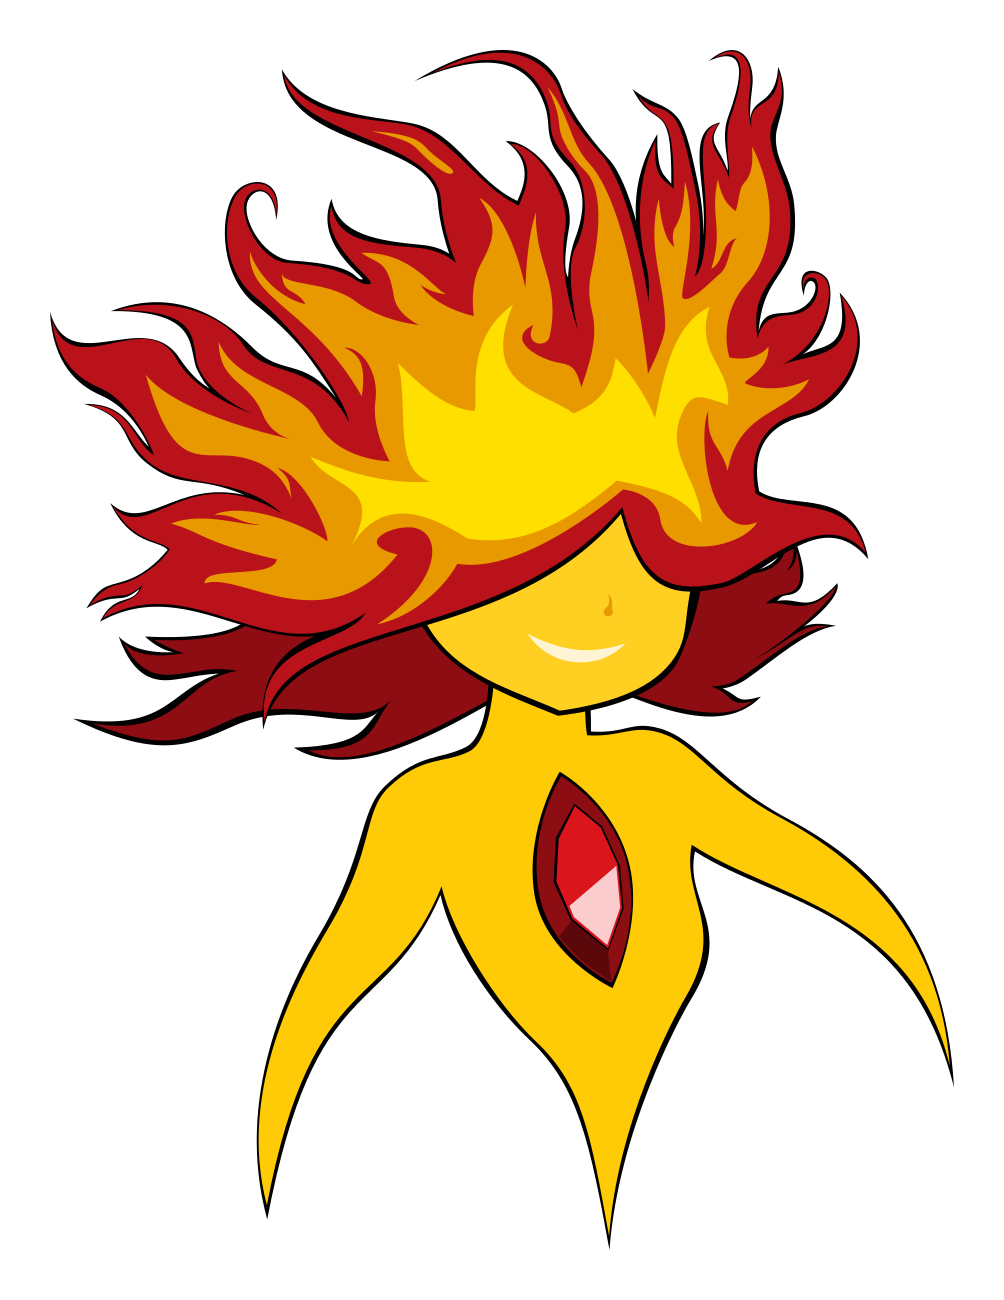 A human-like spirit with flames for hair and a ruby protruding from their chest.